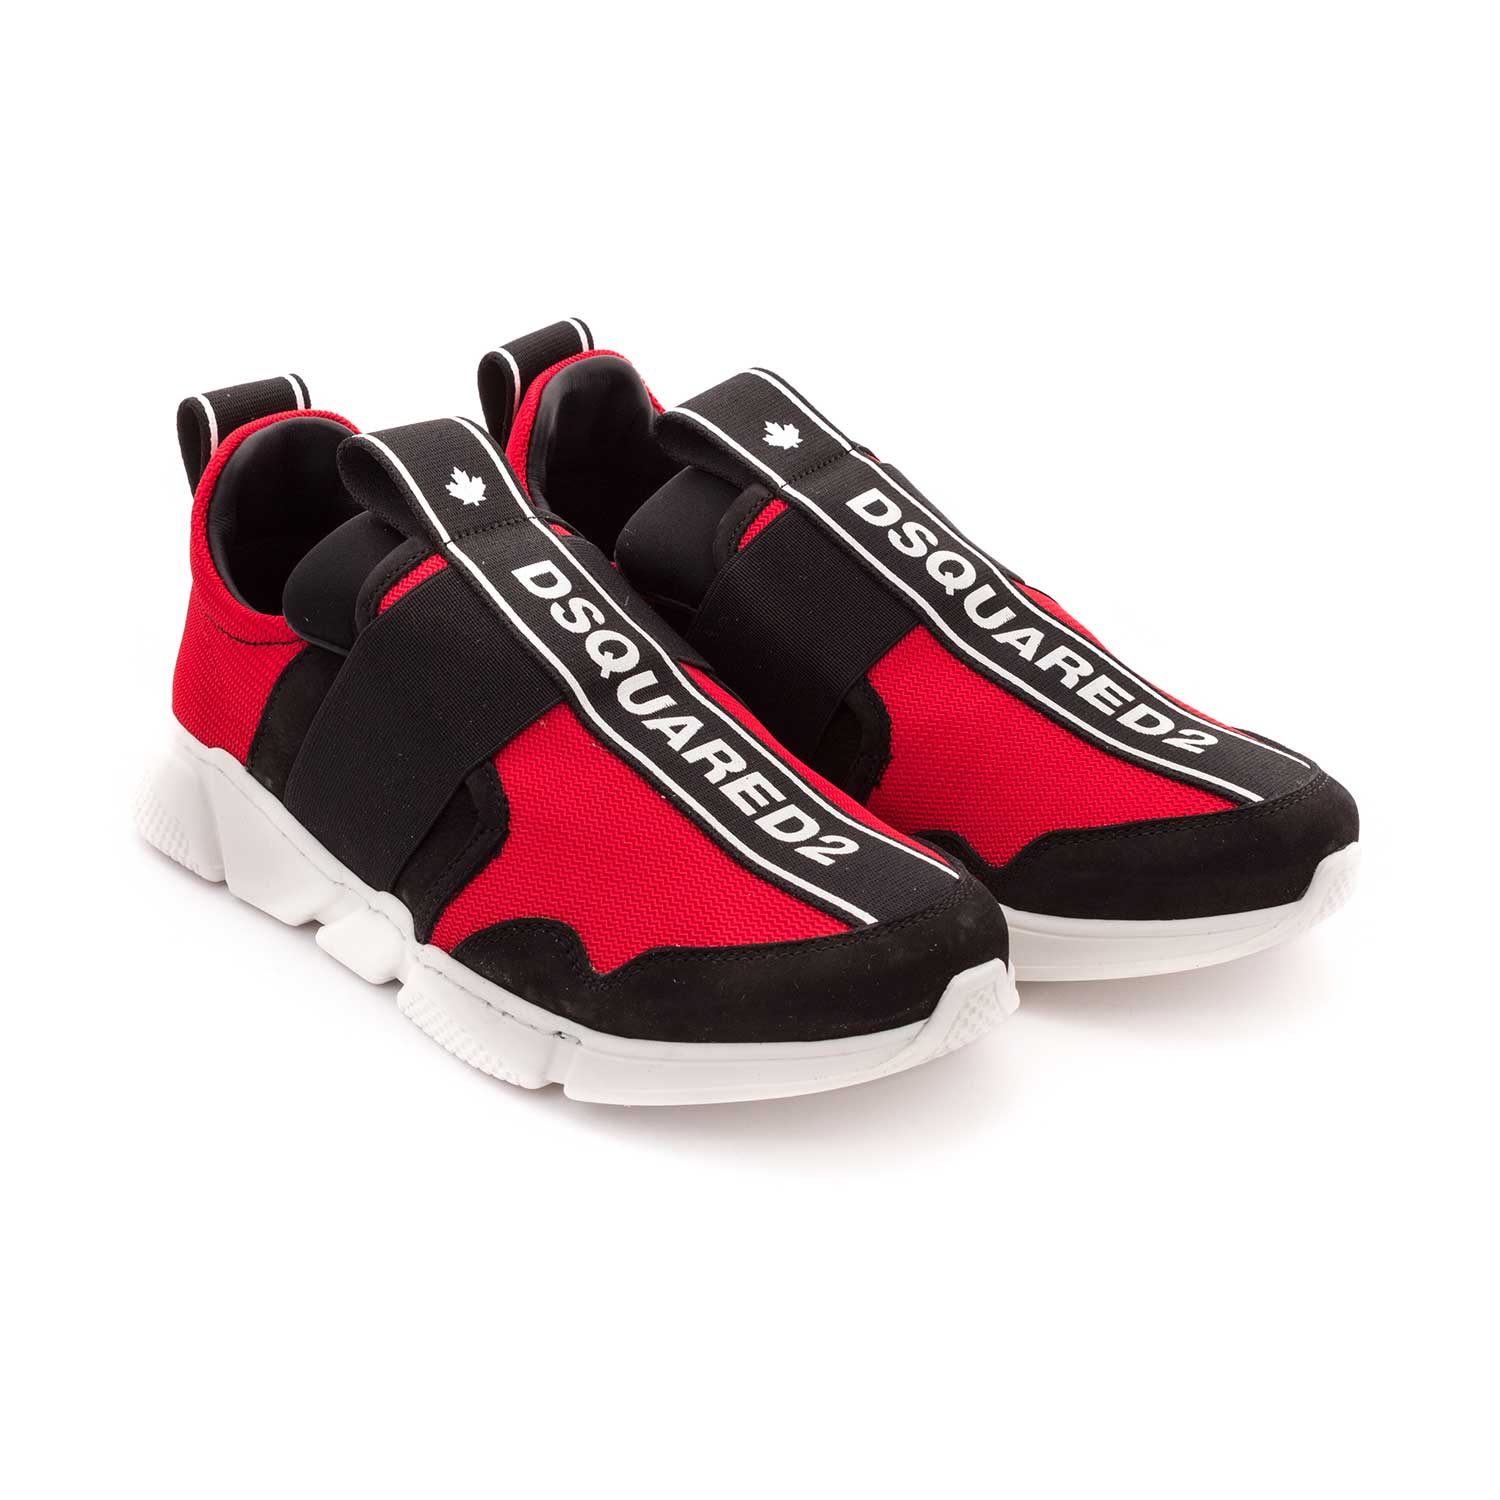 dsquared sneakers outlet